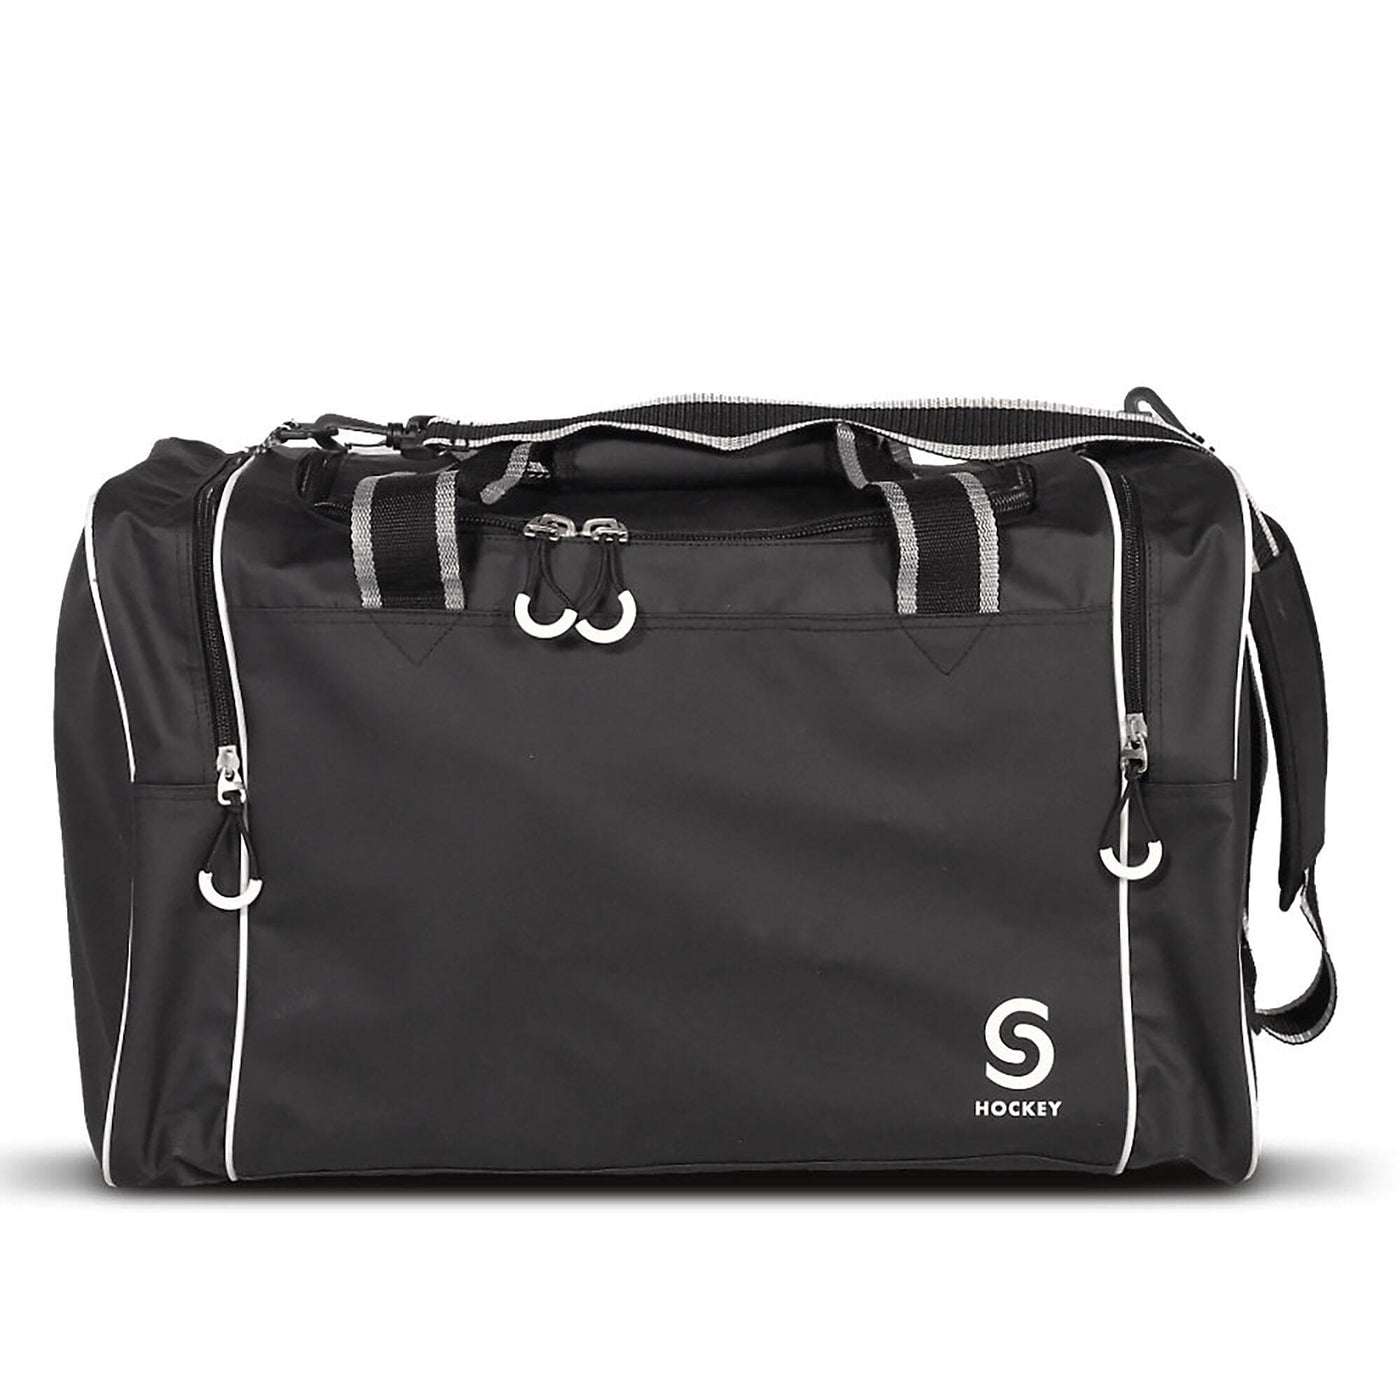 Source For Sports Blackedge Duffle Bag - The Hockey Shop Source For Sports